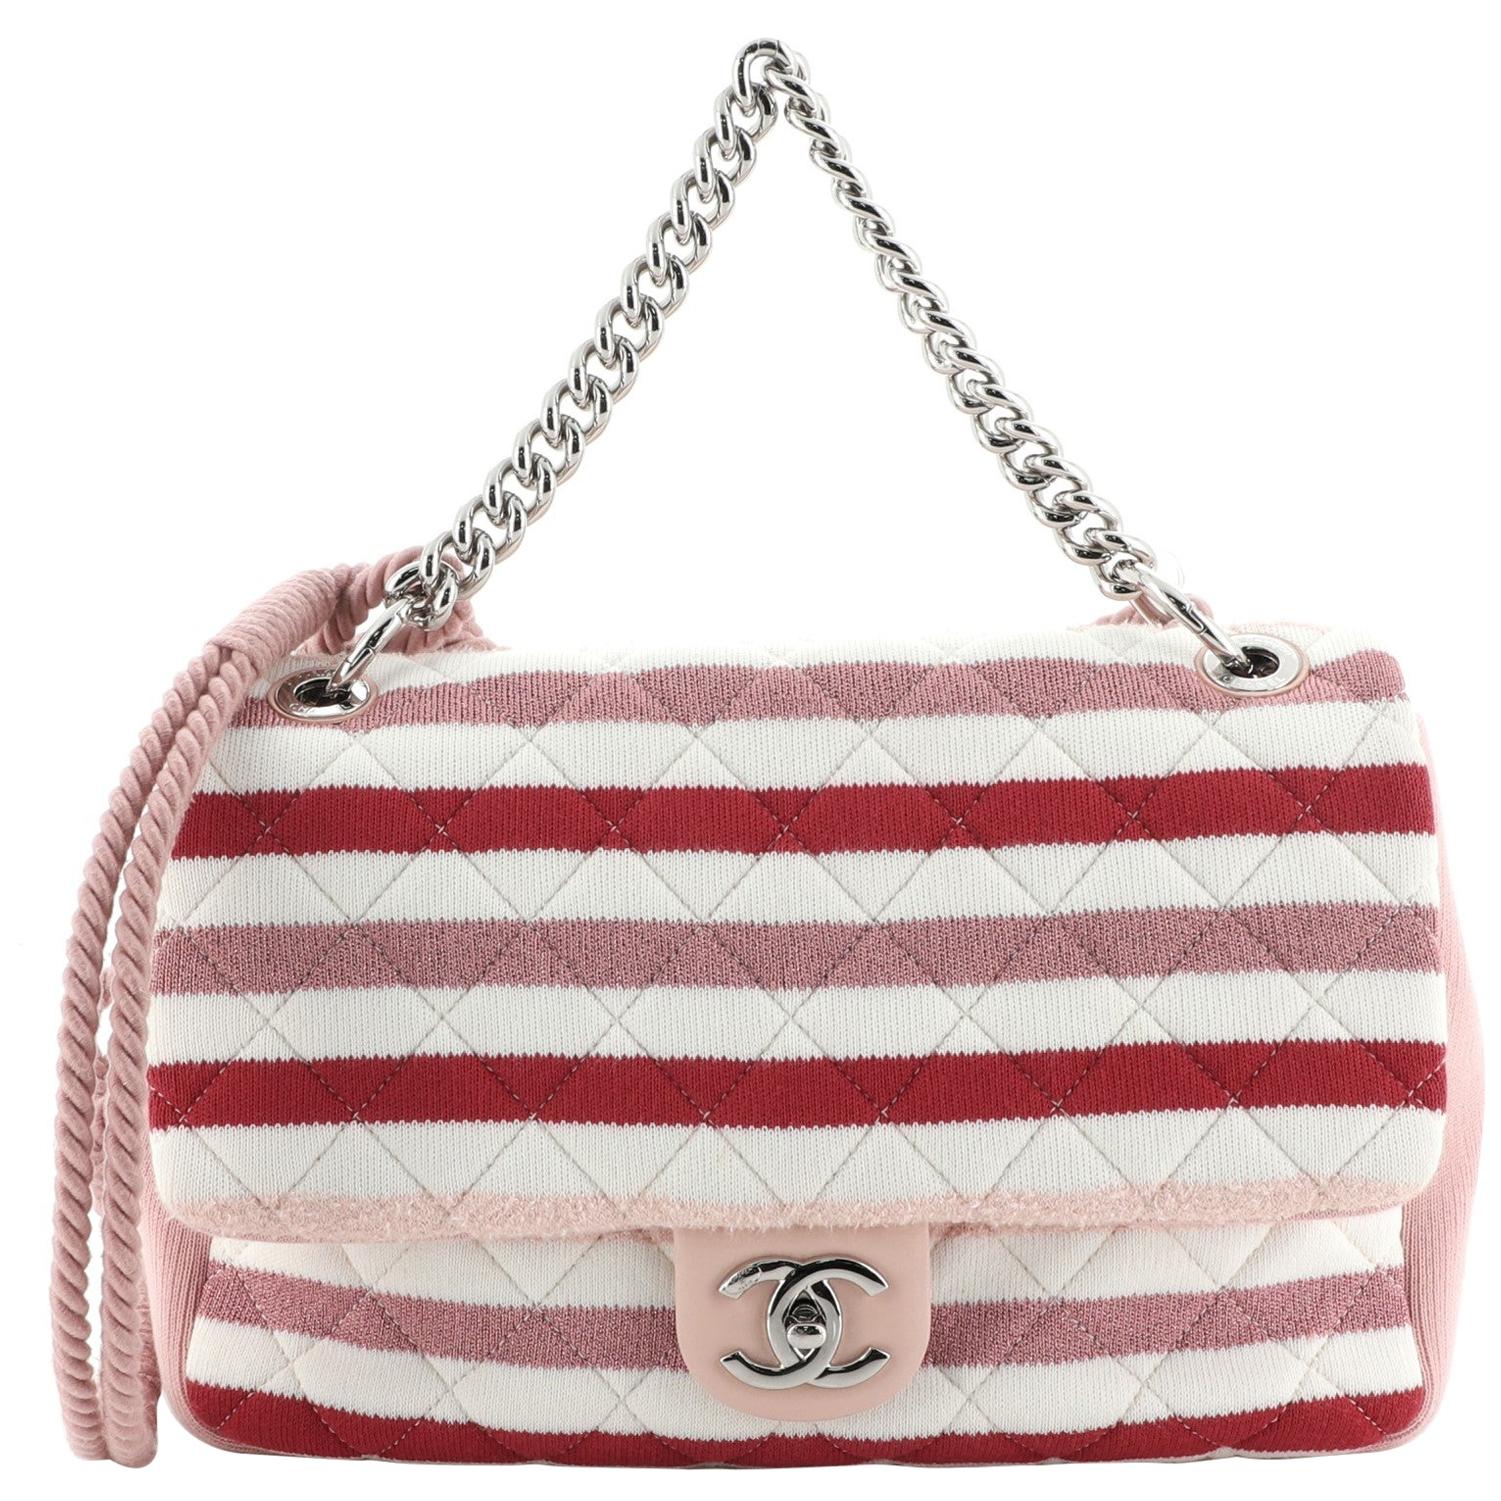 CHANEL, Bags, Authentic Matelasse Striped Jersey Rope Flap Bag